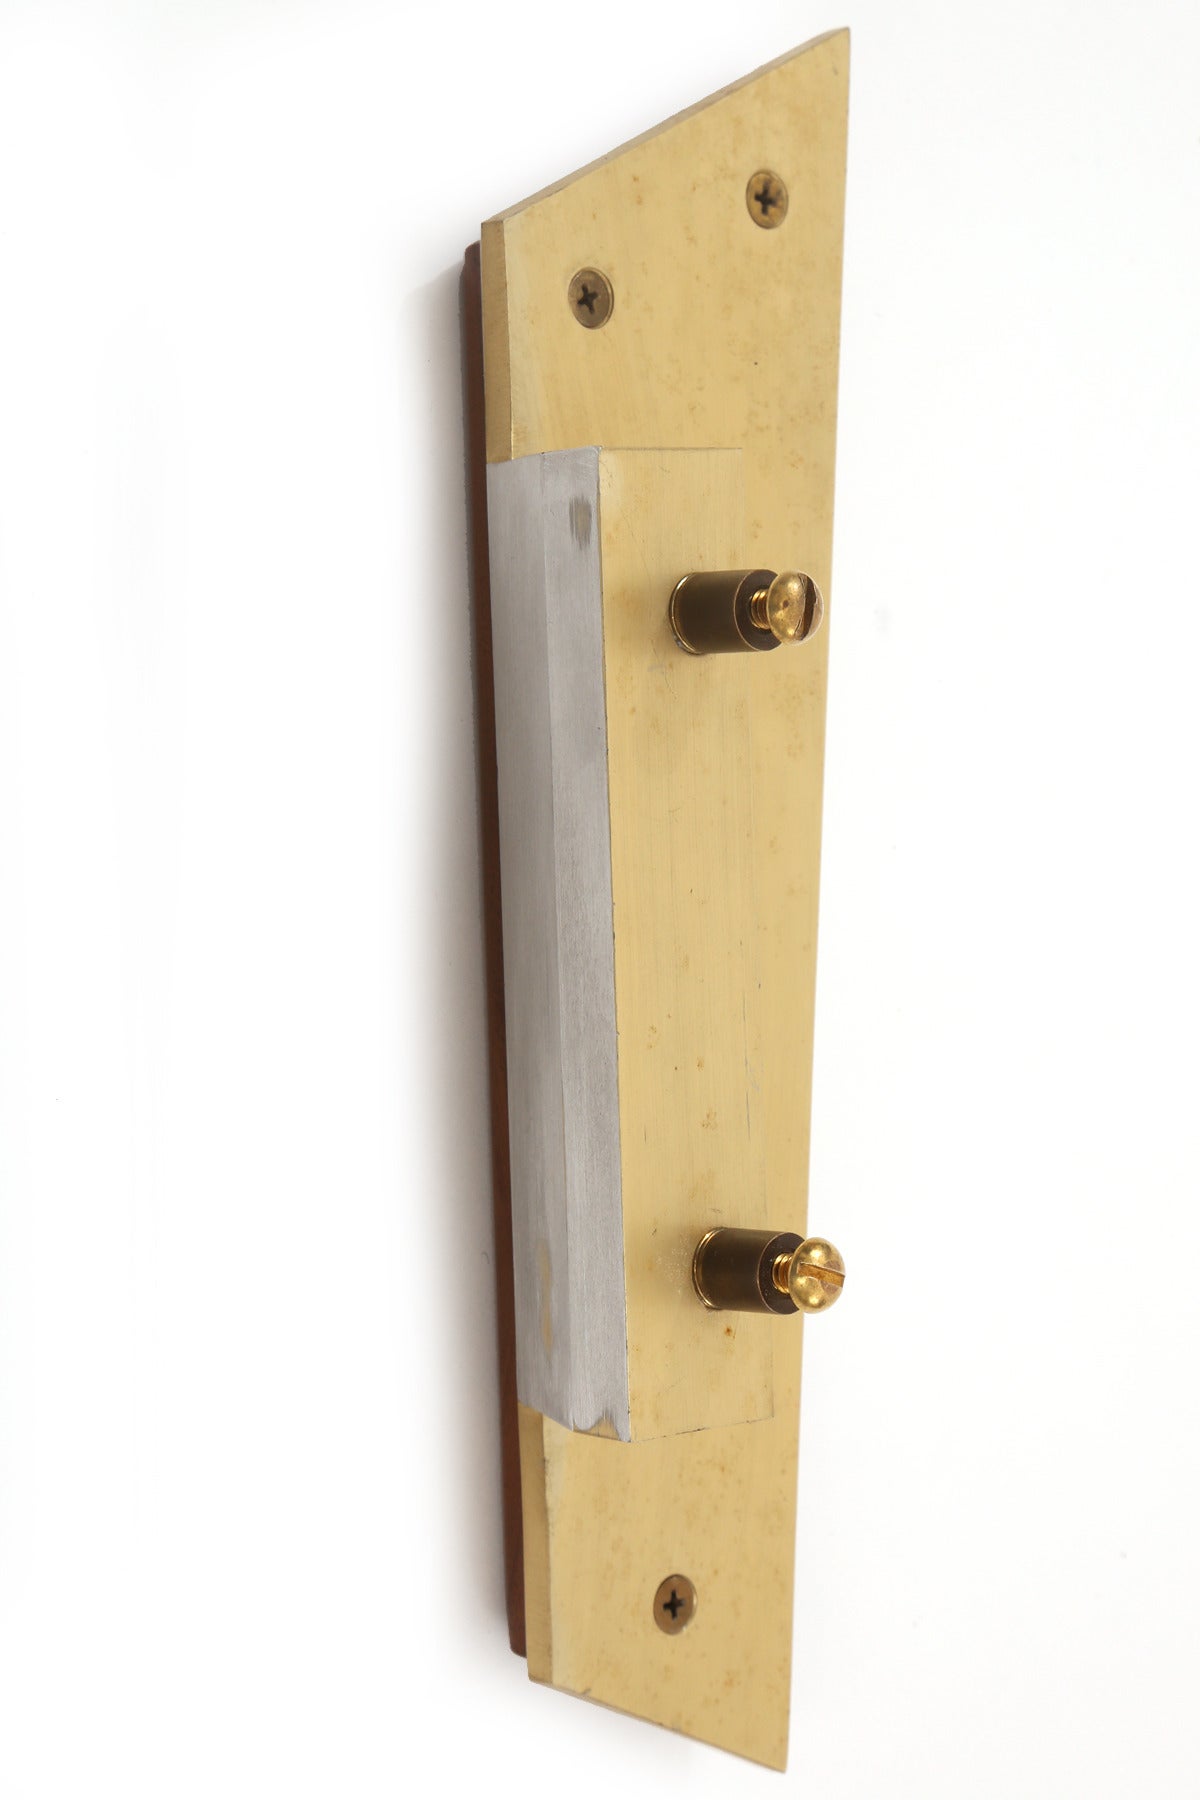 Anodized aluminum brass and walnut door handle, circa mid-1960s. This example has a beautifully grained solid walnut face on a brass face plate. 